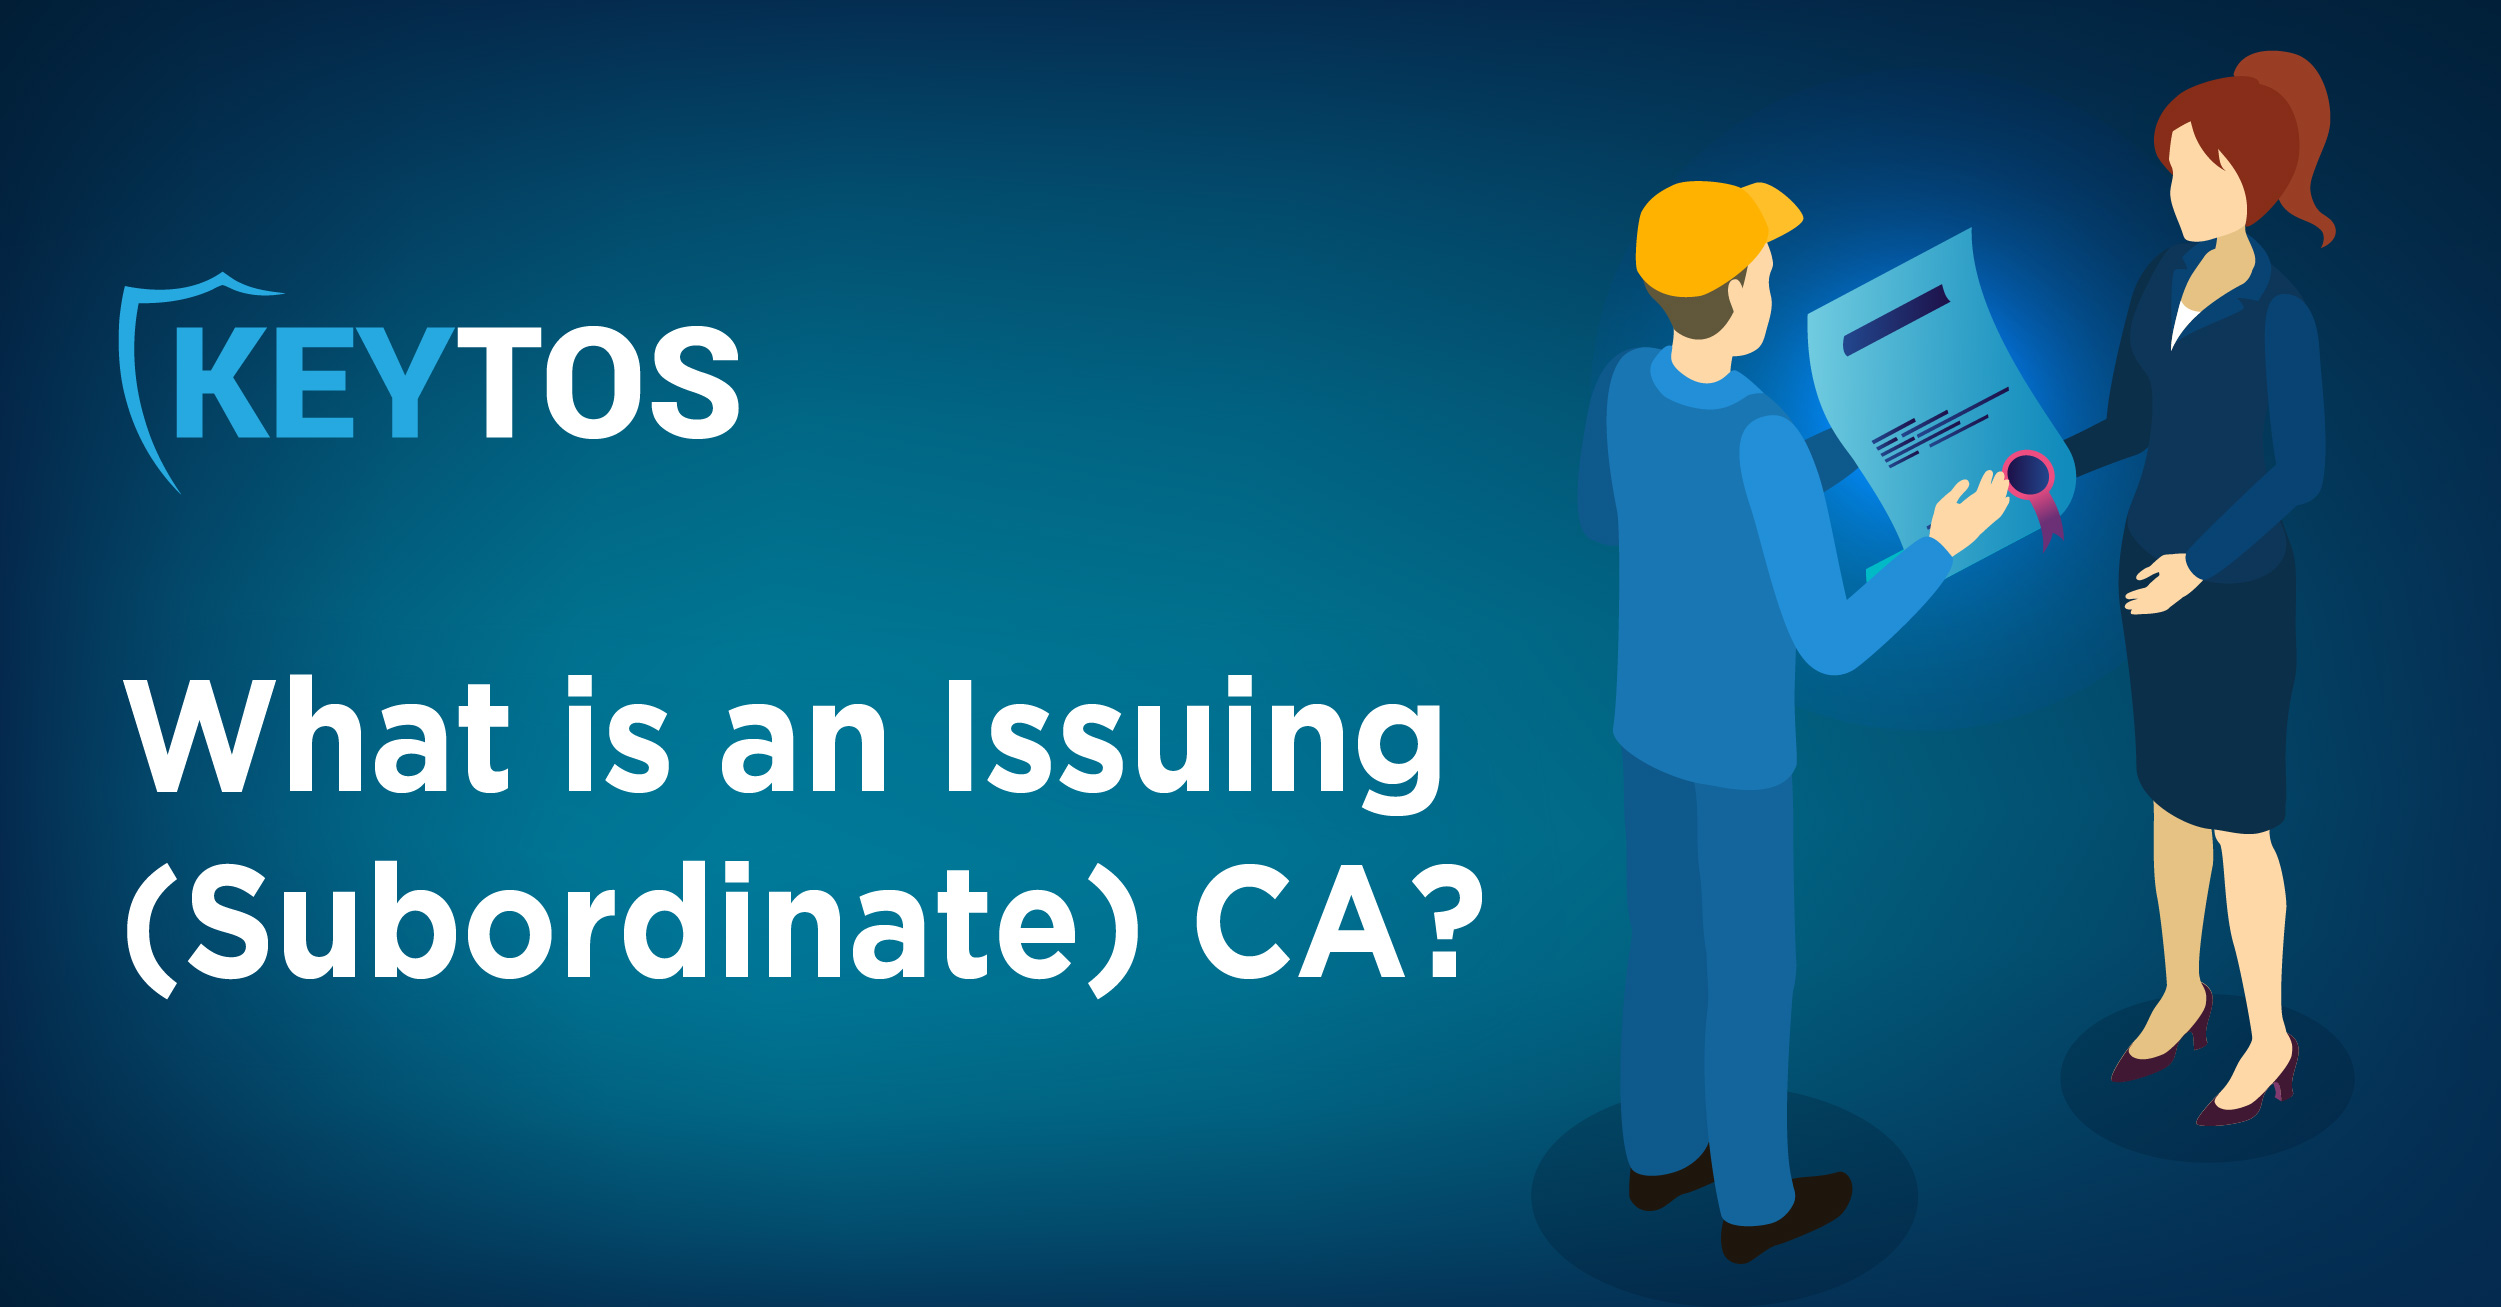 What is a Subordinate CA? (What is an Issuing CA?)